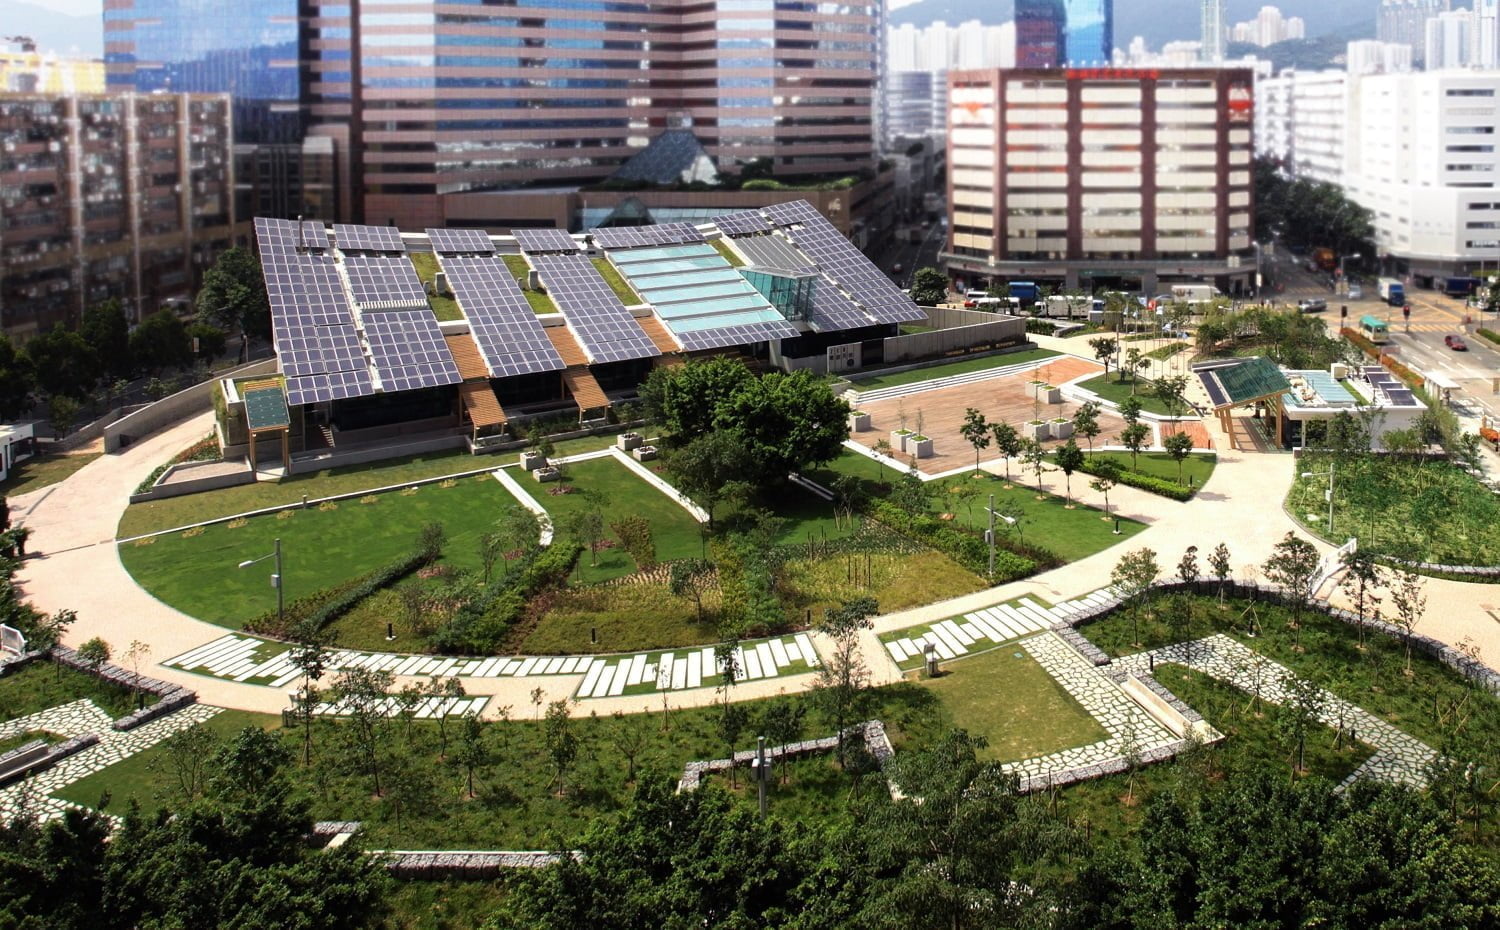 A wide roof covered with solar panels, with greenery around and buildings beyond